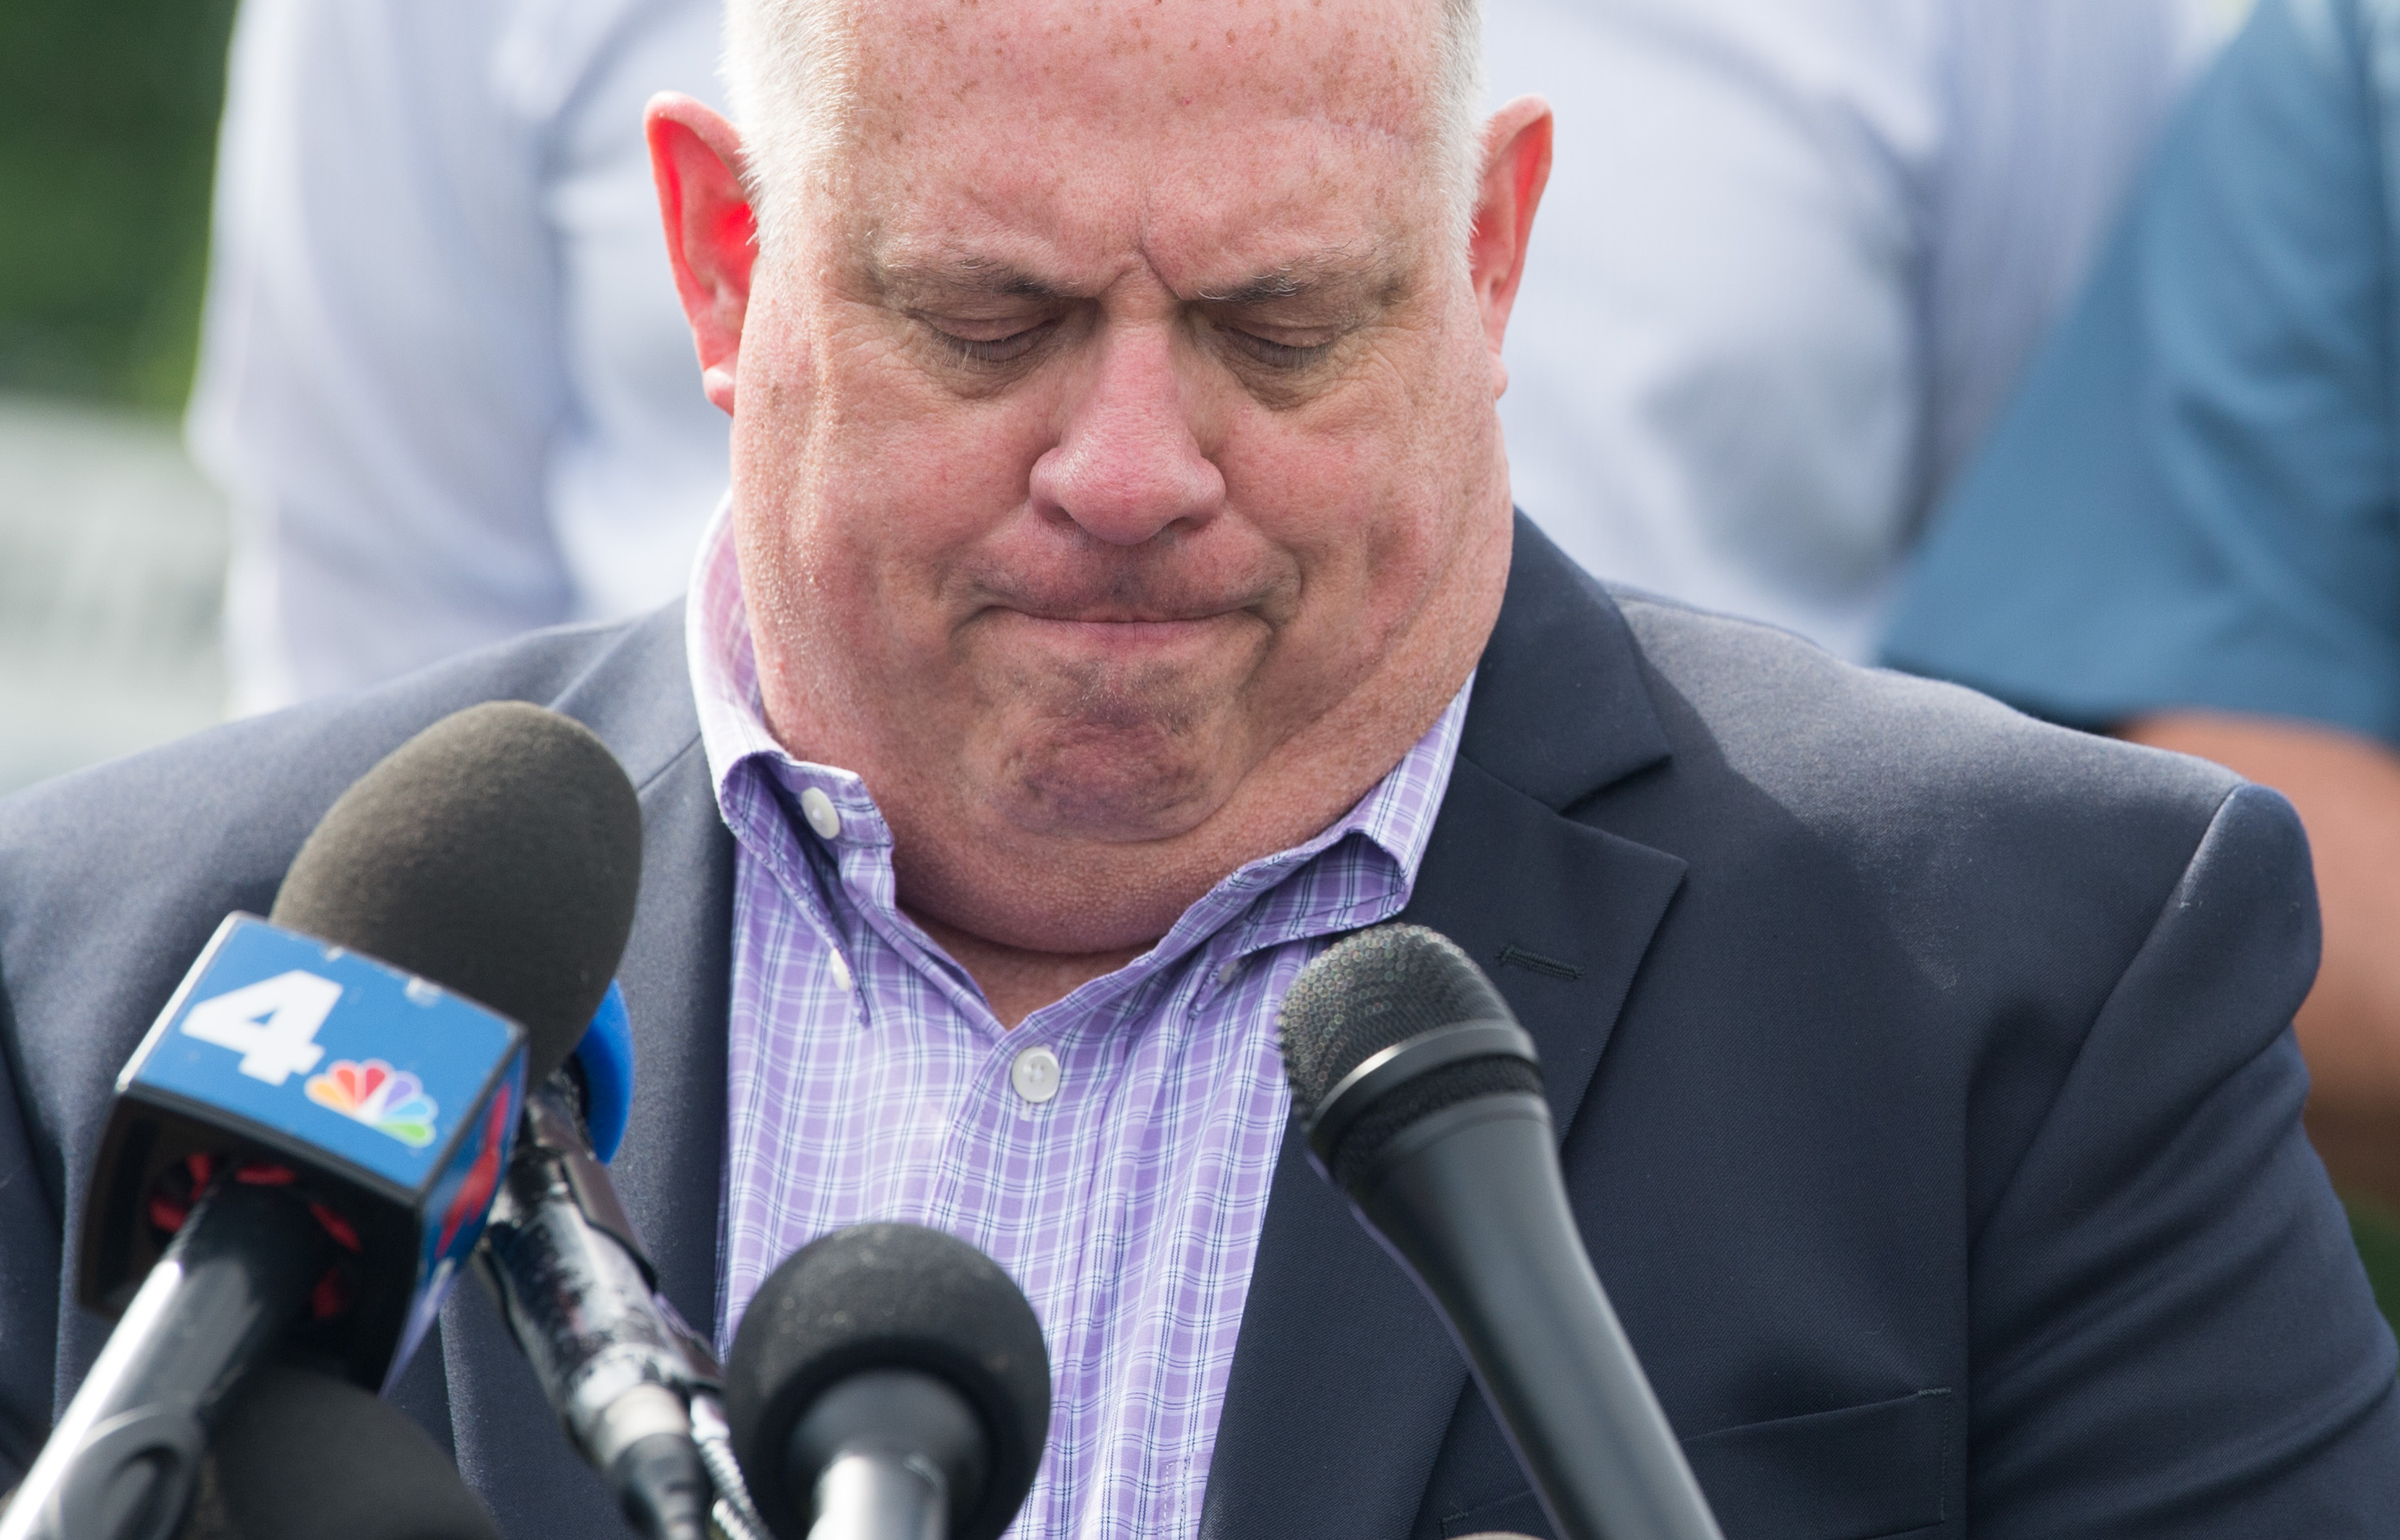 Maryland Governor Larry Hogan speaks during a press conference following a shooting in Annapolis, Maryland, June 28, 2018. (SAUL LOEB/AFP/Getty Images)